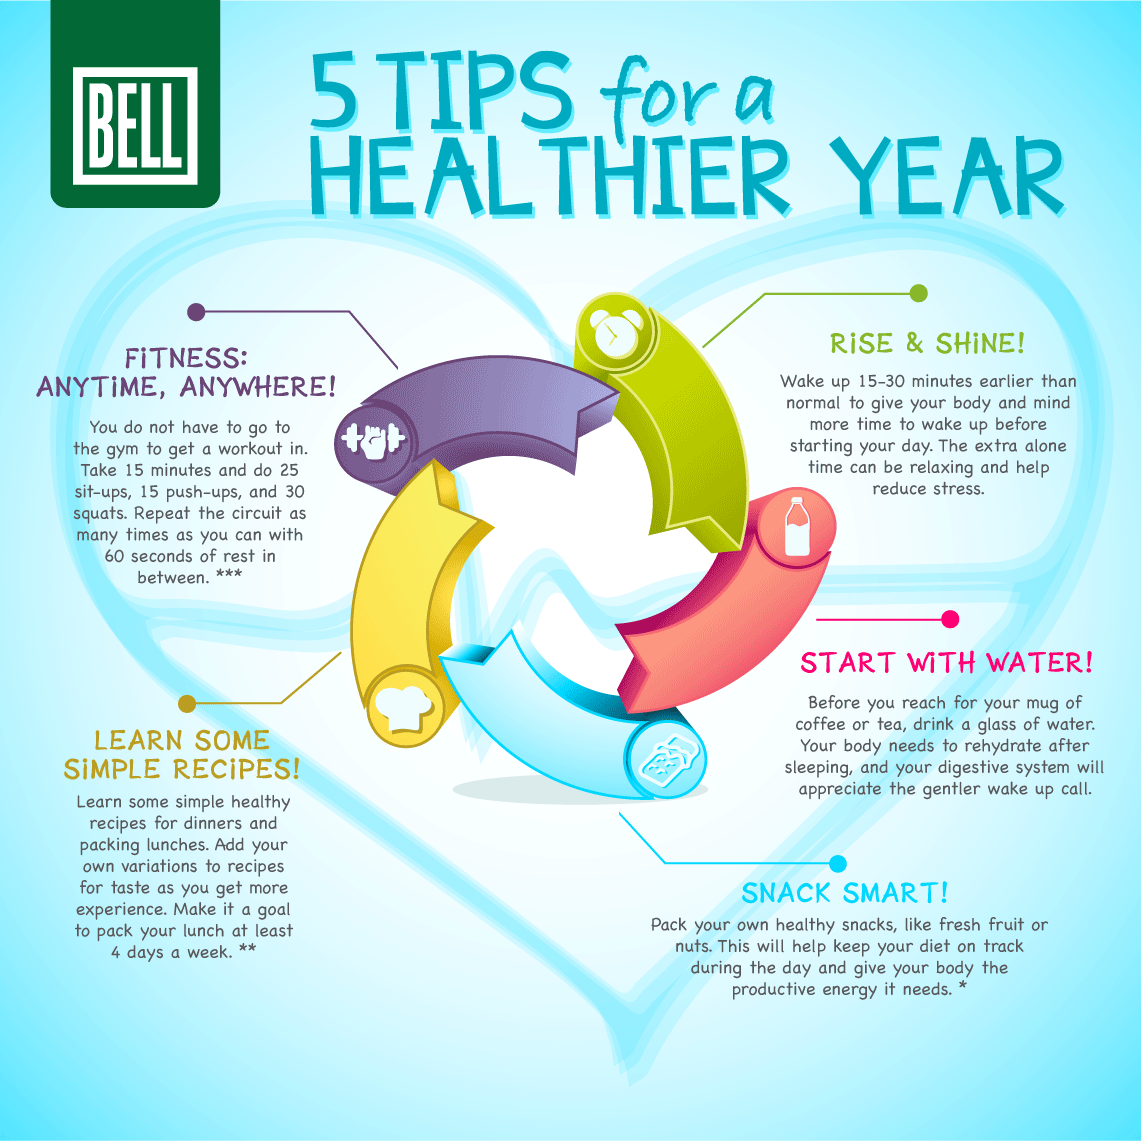 5 Tips for a Healthier Year [Infographic] | Bell Wellness ...